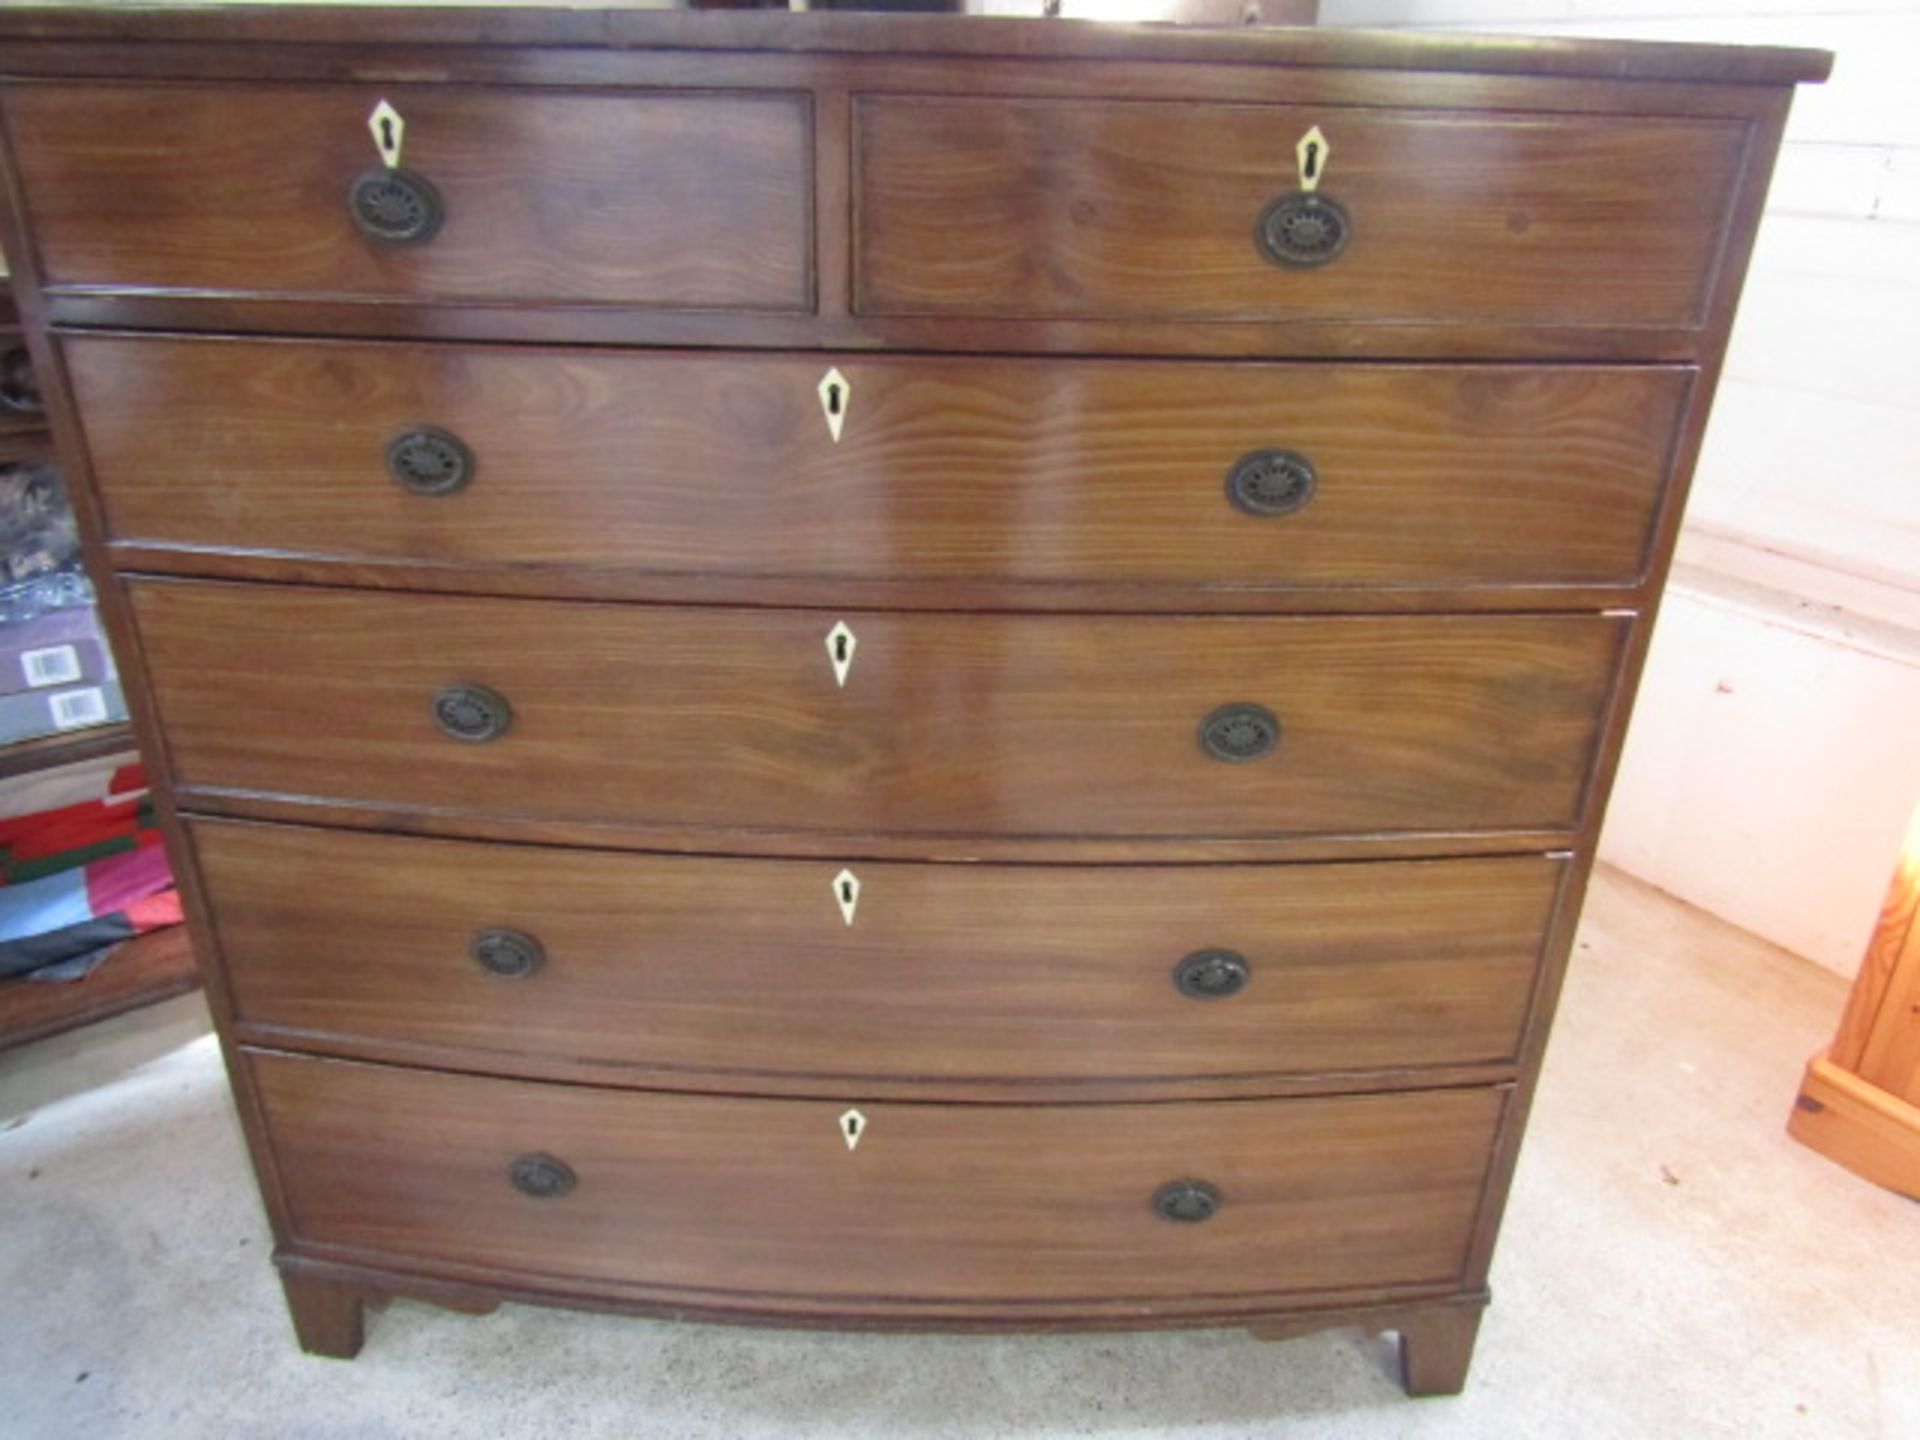 Antique bow fronted 2/4 chest of drawers with mother of pearl escutcheons 115cmW 57cmD 116cmH - Image 4 of 5